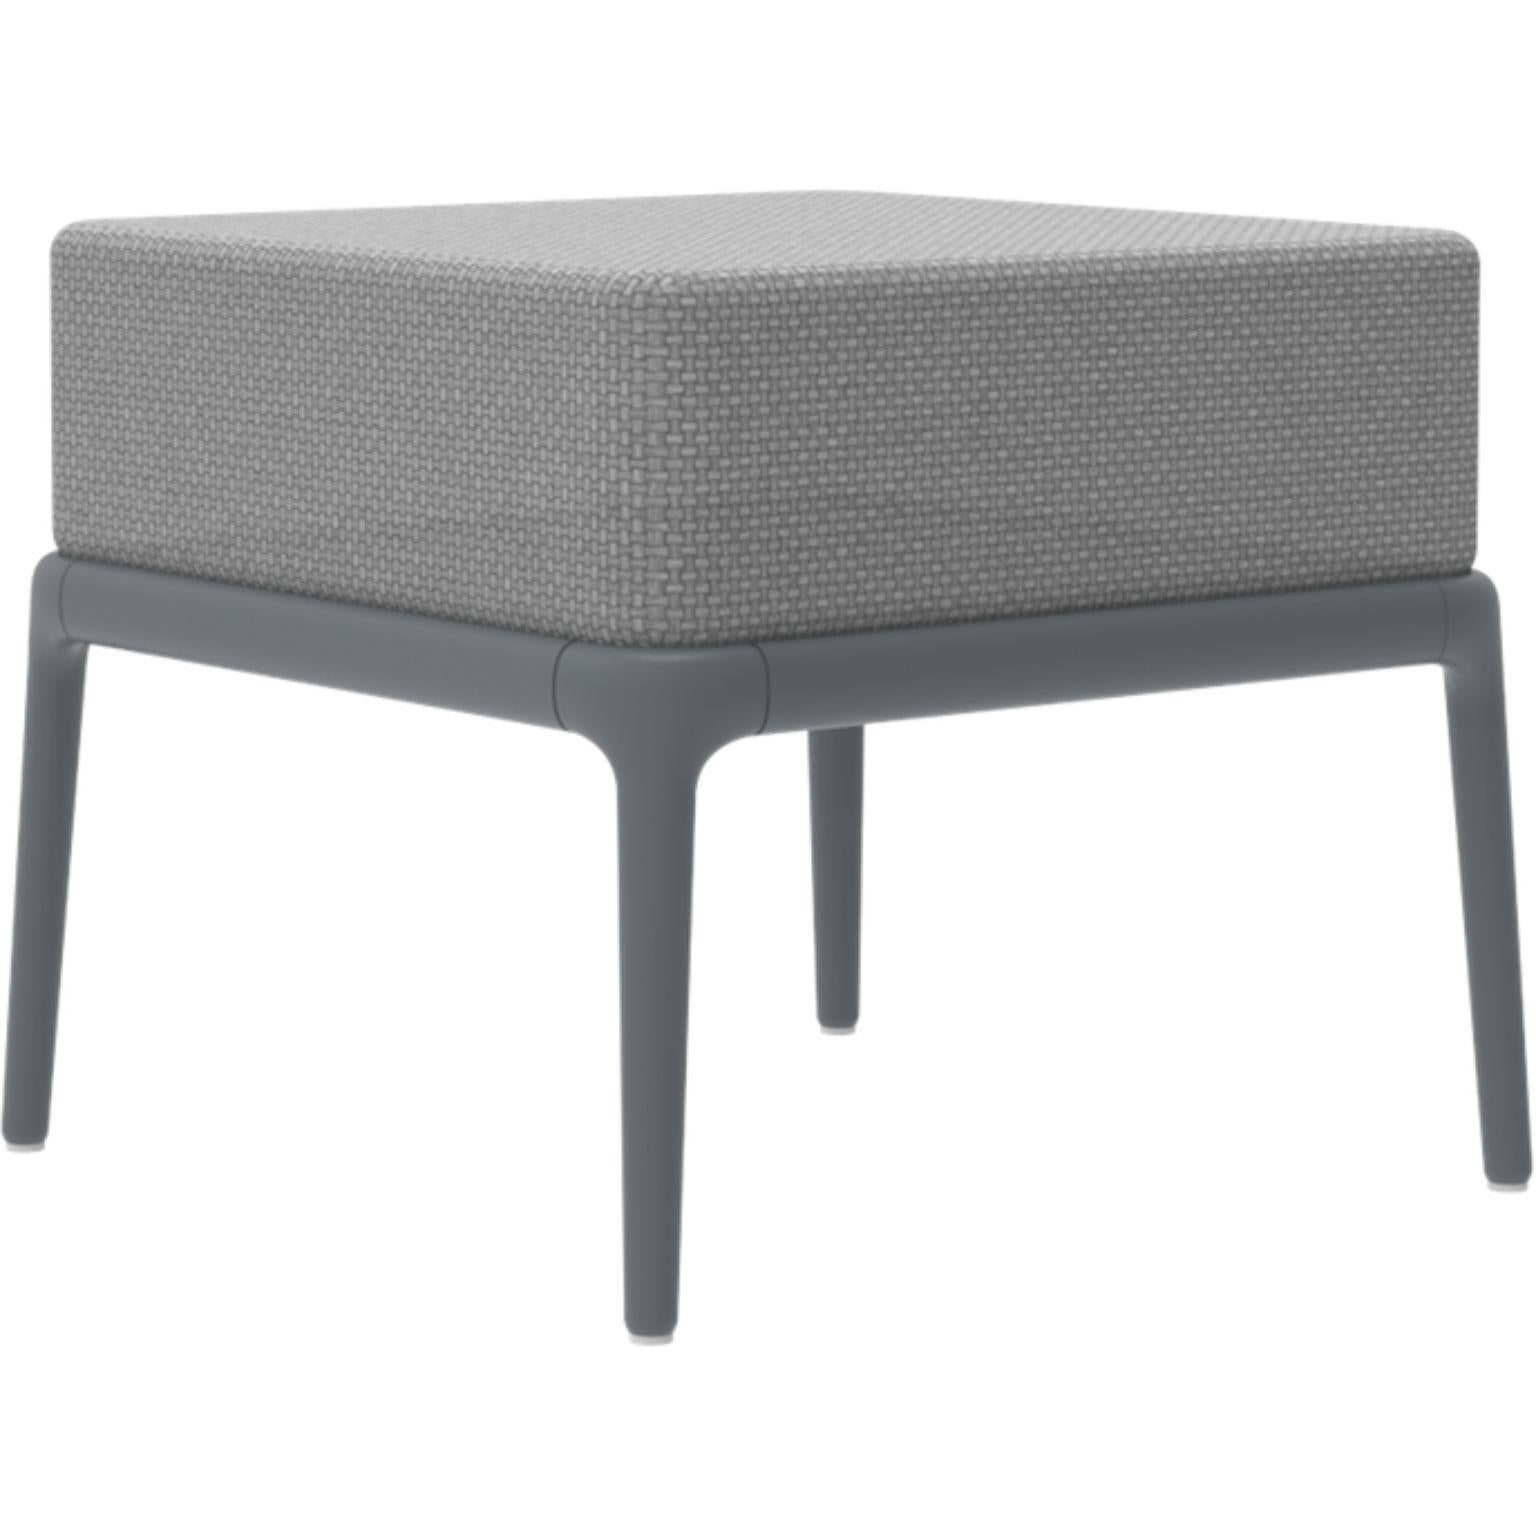 Xaloc grey pouf 50 by MOWEE
Dimensions: D50 x W50 x H43 cm
Material: Aluminum, Textile
Weight: 7 kg
Also Available in different colors and finishes.

 Xaloc synthesizes the lines of interior furniture to extrapolate to the exterior, creating